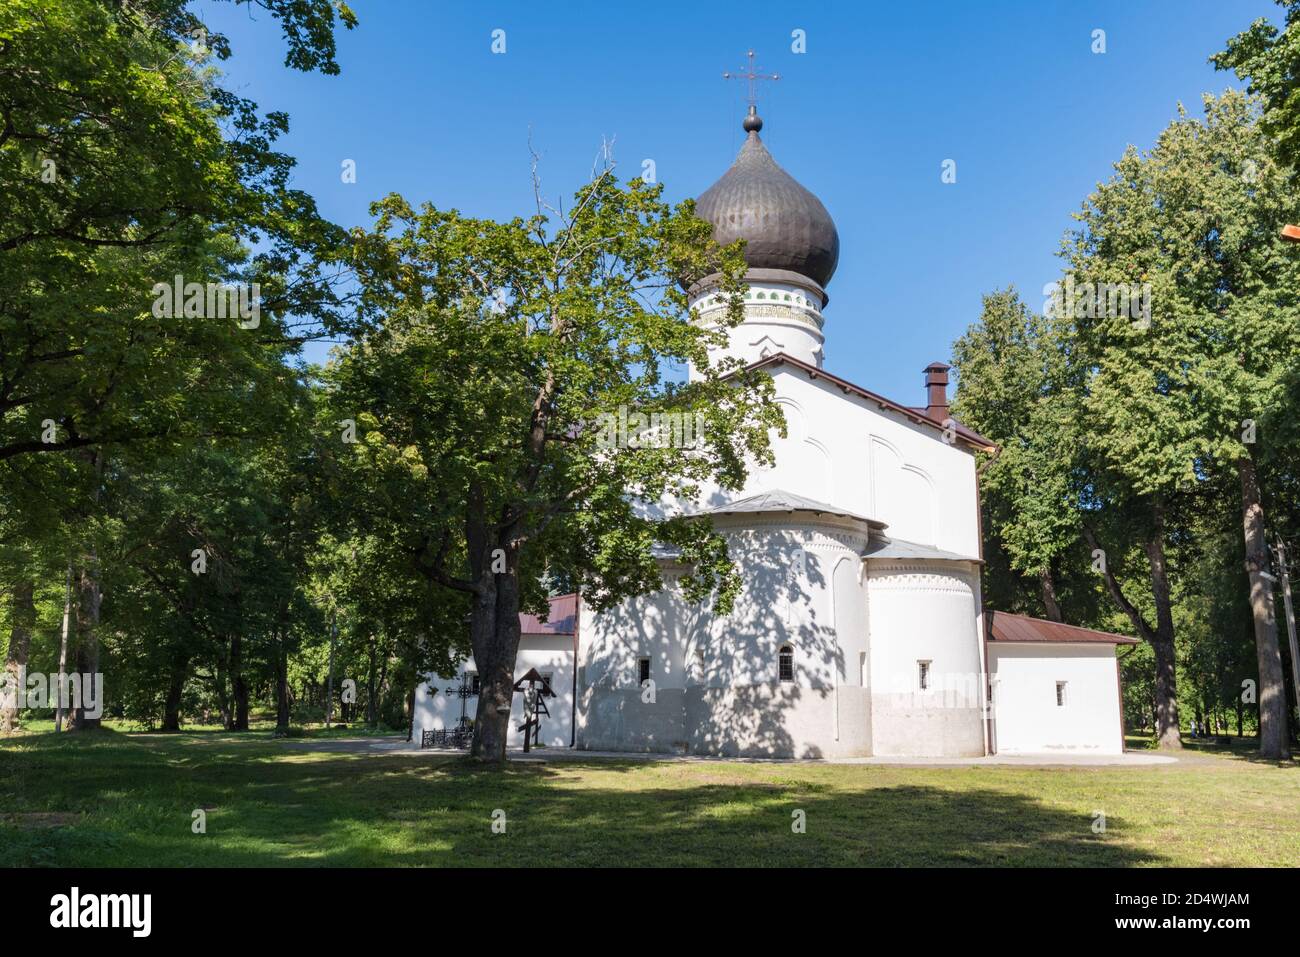 Cathedral of Our Lady Sovereign. Gdov fortress. The cathedral was built in 1991 on the site of the ancient Cathedral of St. Demetrius of Thessalonica Stock Photo